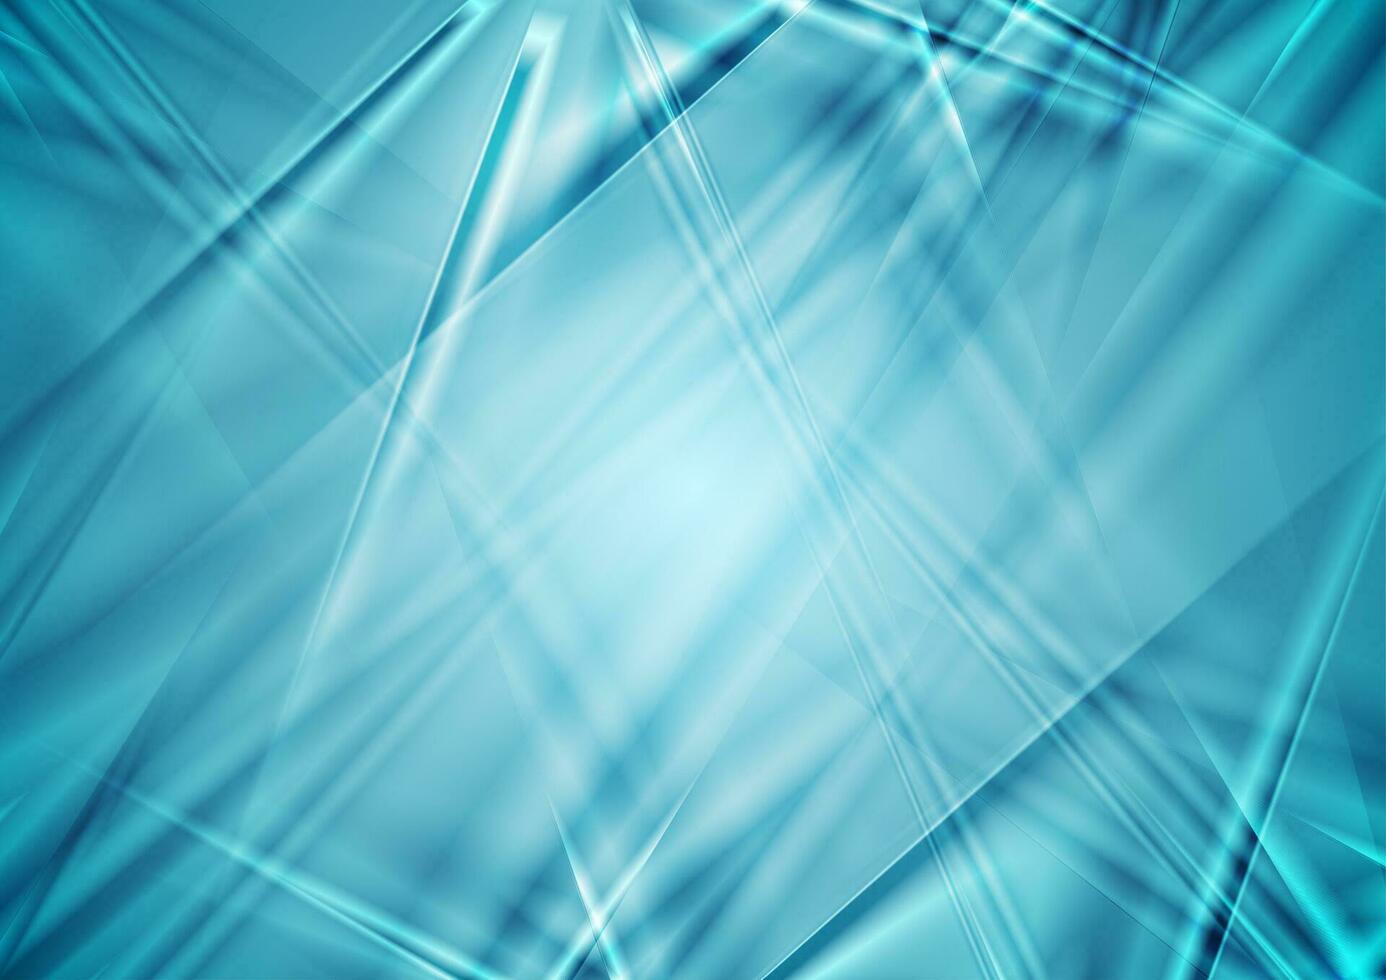 Blue glossy rays abstract shiny background vector